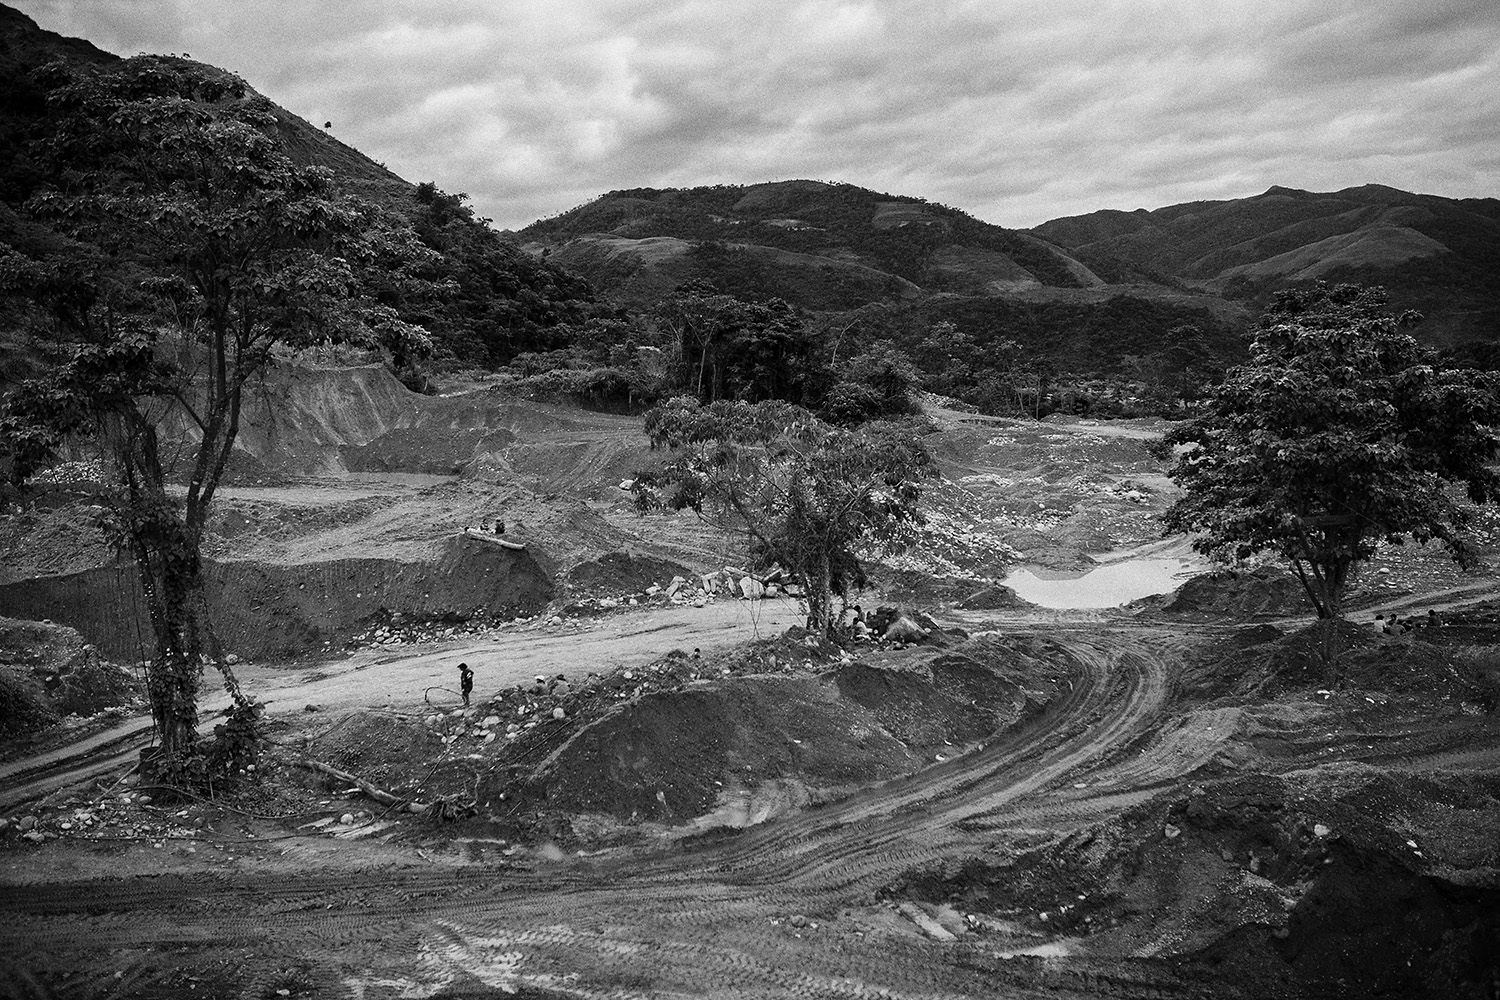 after the soil has been processed. Tipuani, Bolivia. 